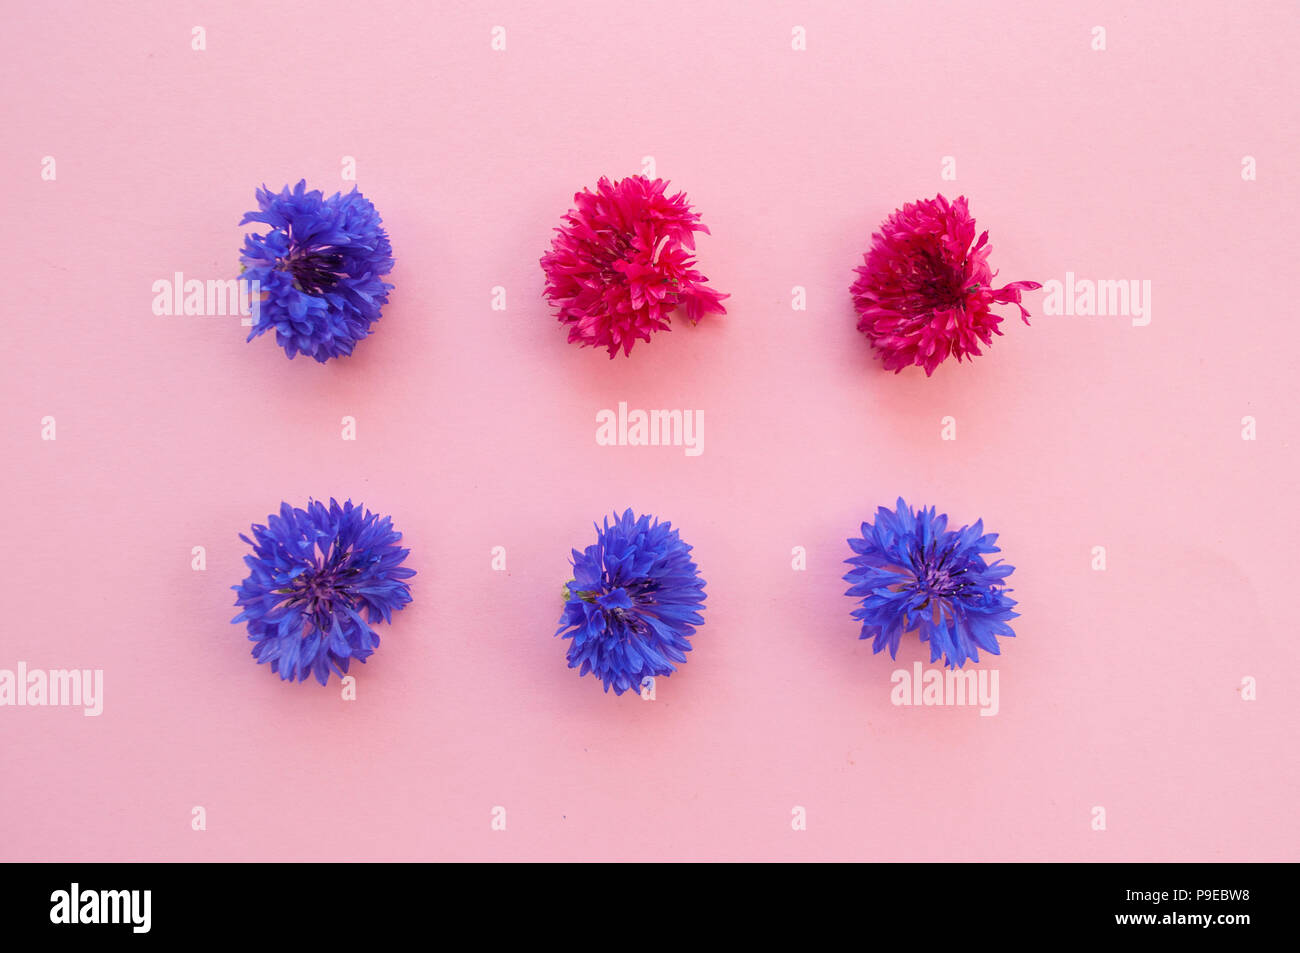 Two rows of pink and blue corfnflowers or bachelor buttons on pastel pink background. Stock Photo